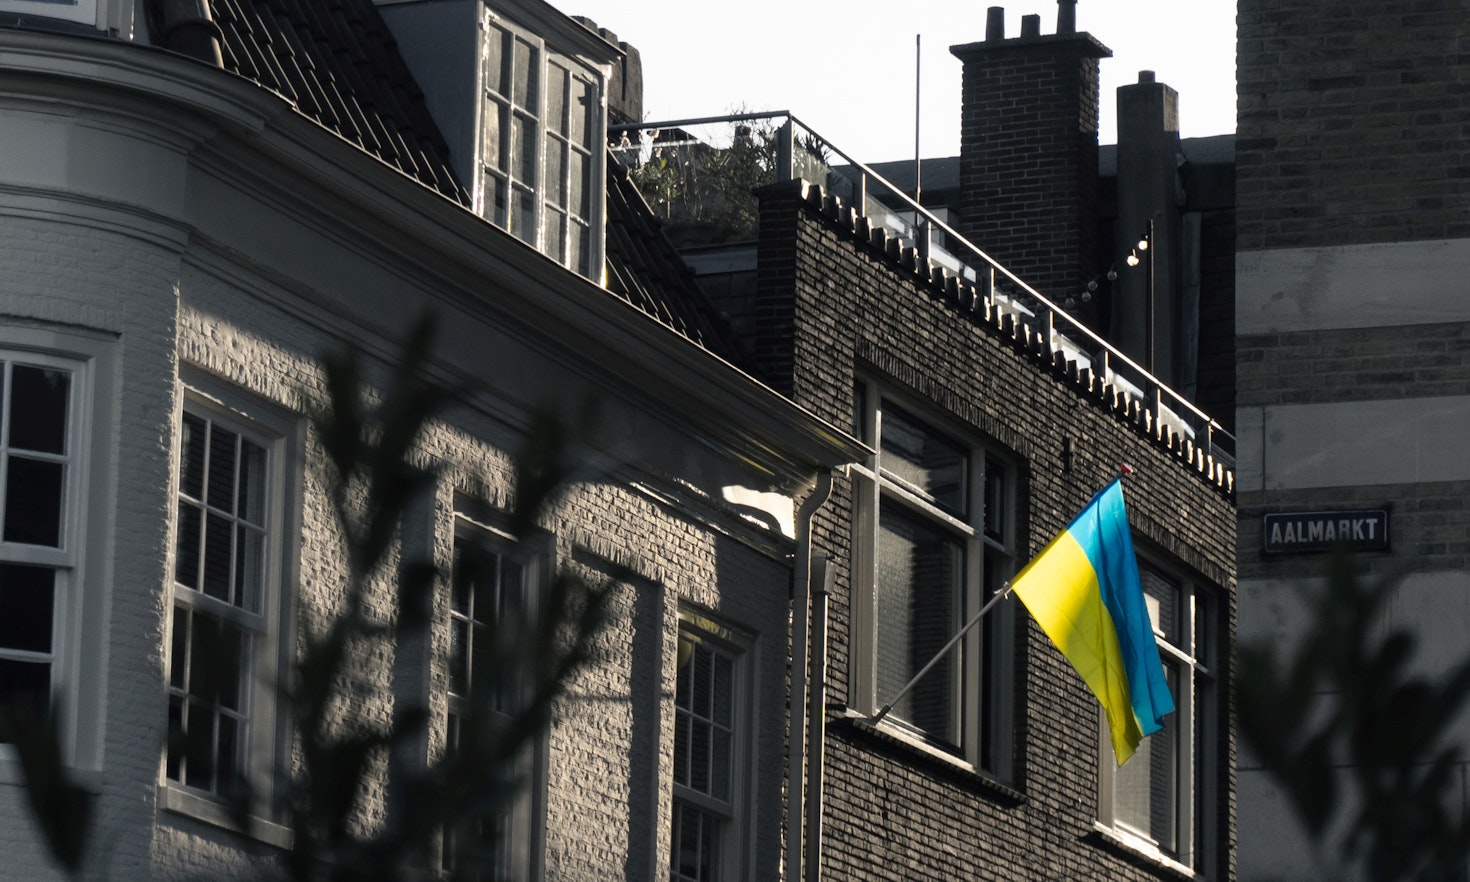 Why the Ukrainian flag in the window matters